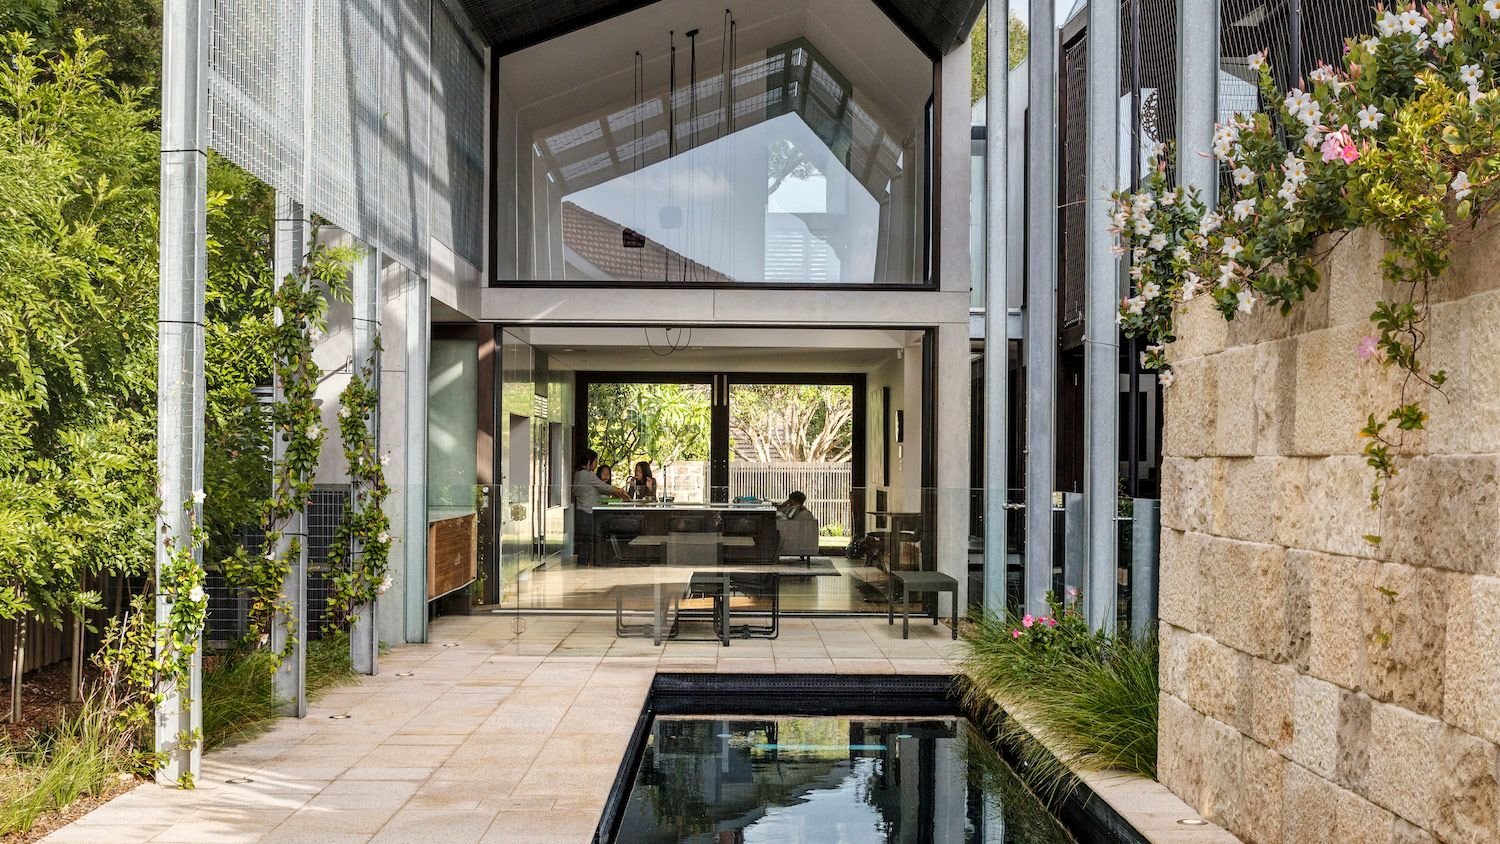 See why this Australian home – with internal ponds and 'rivers' – has gone viral